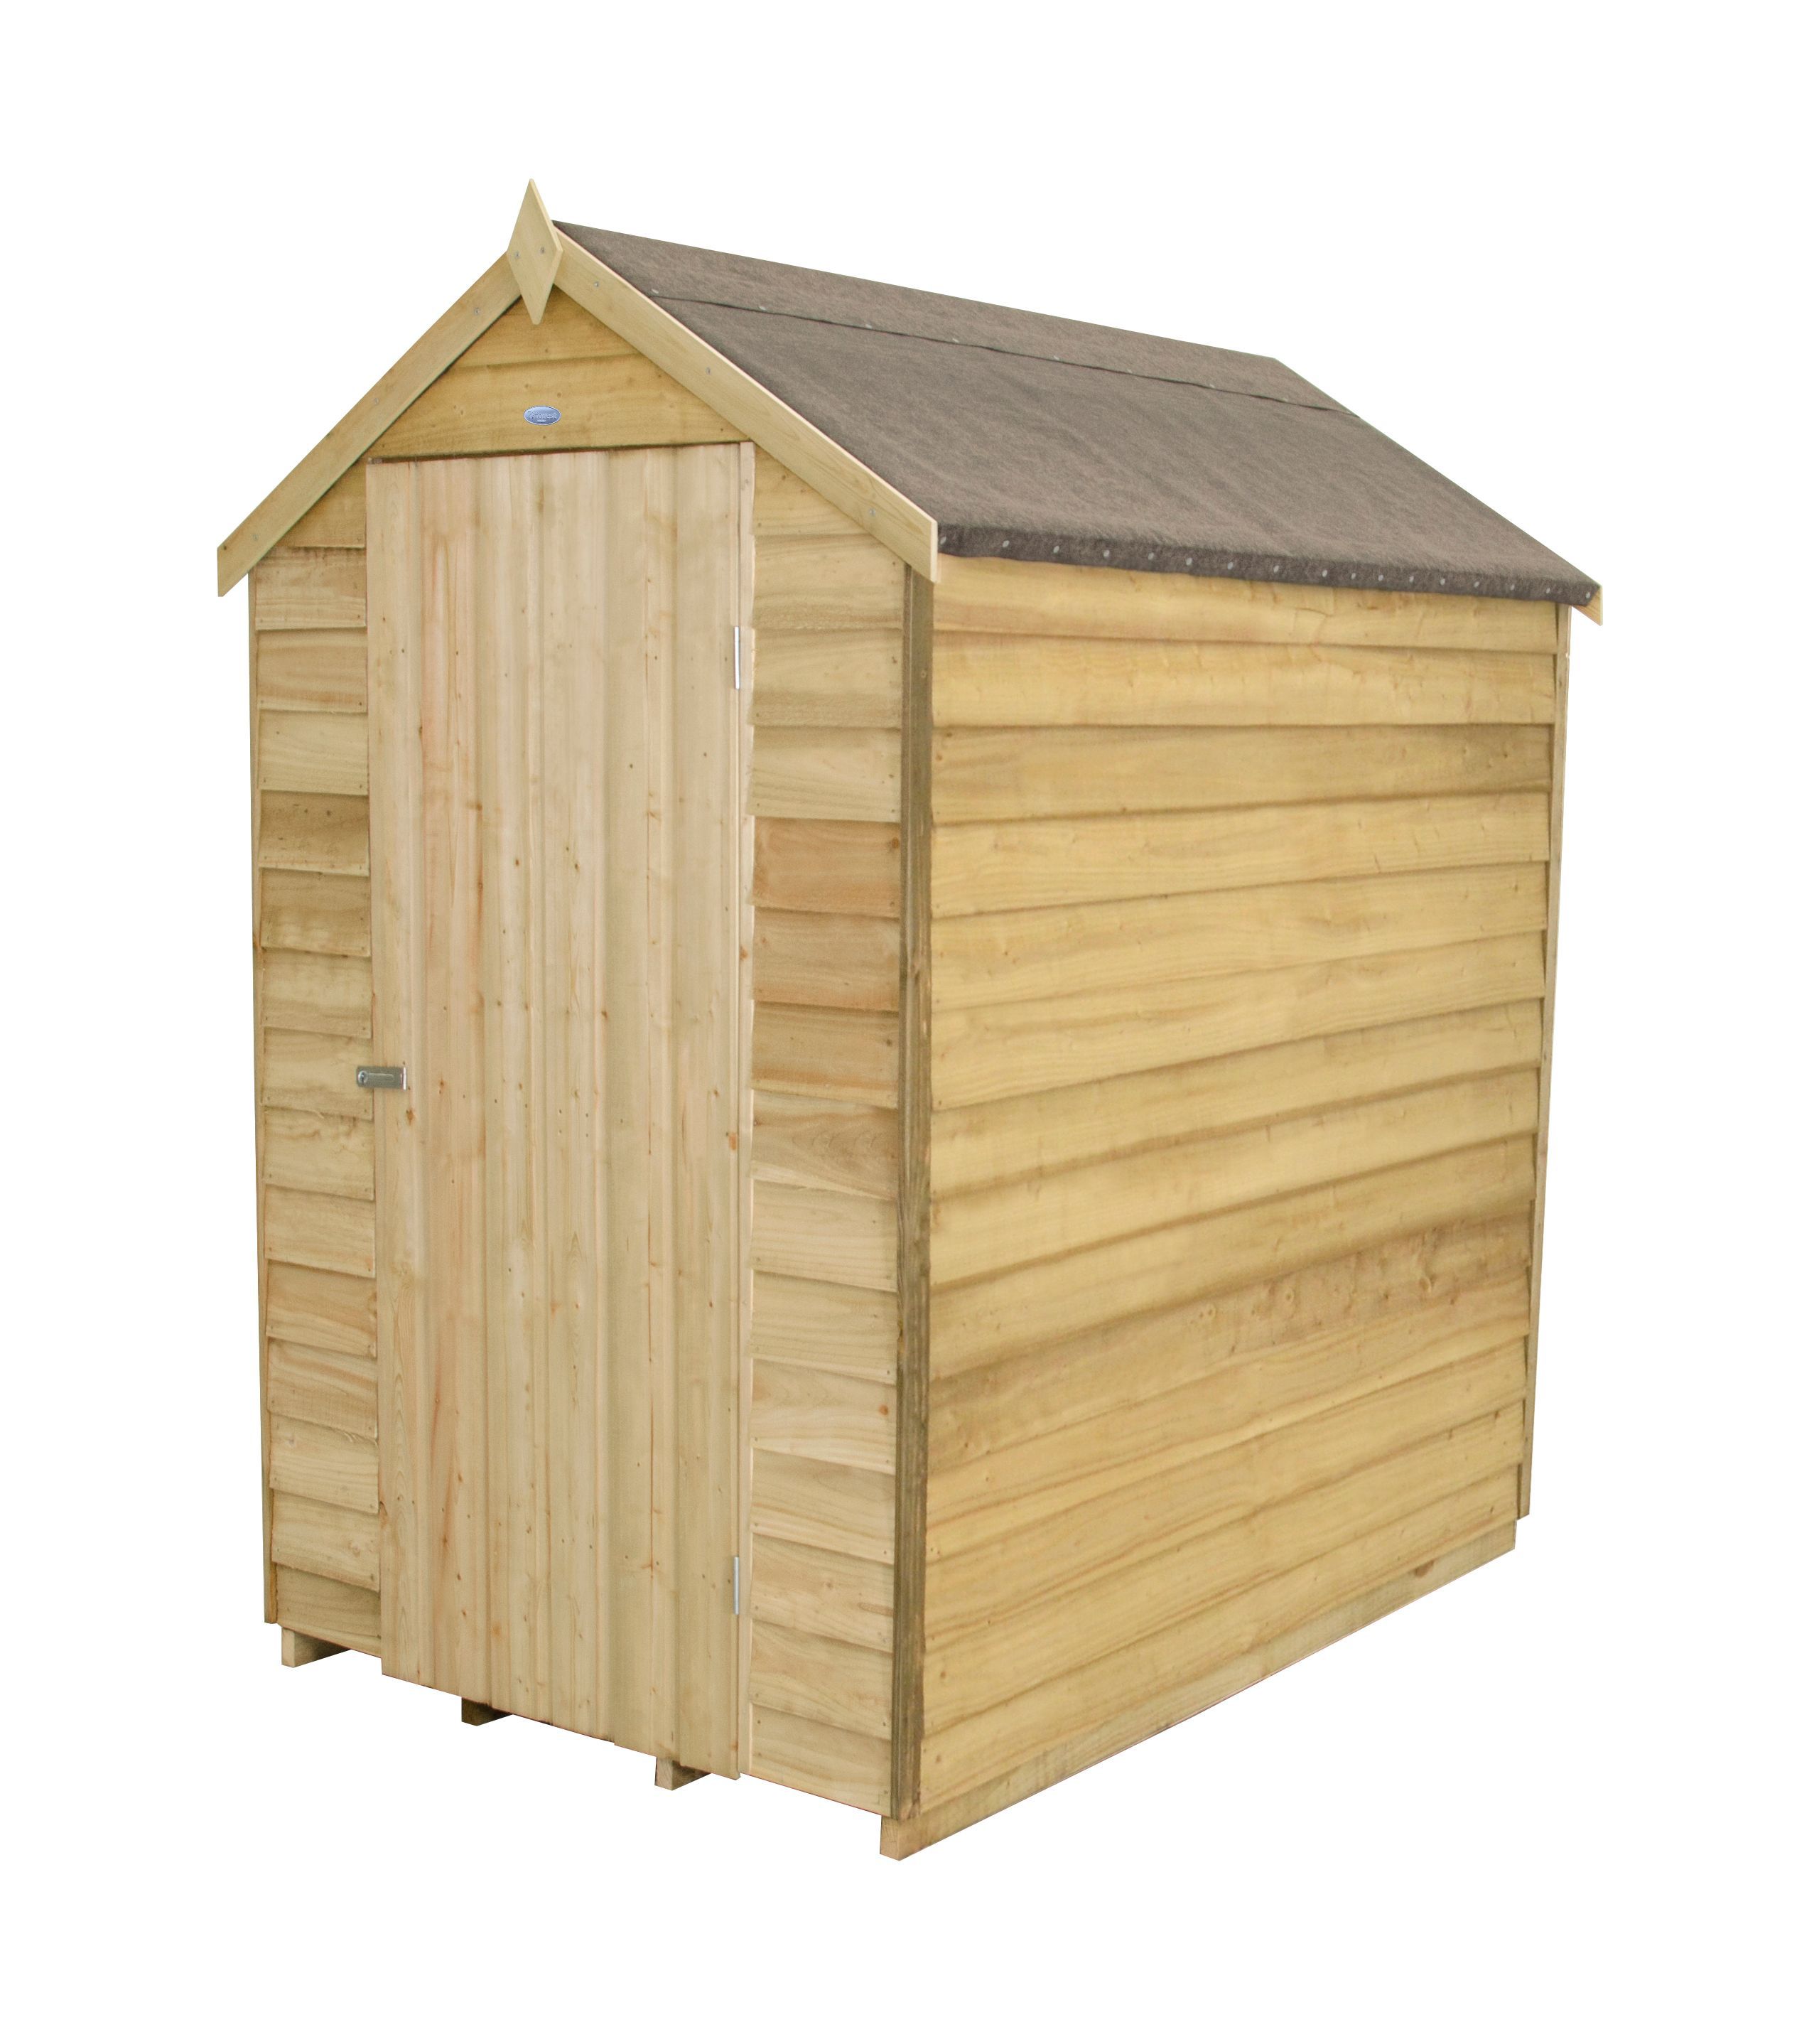 Forest Garden 6x4 Apex Overlap Wooden Shed - Assembly service included